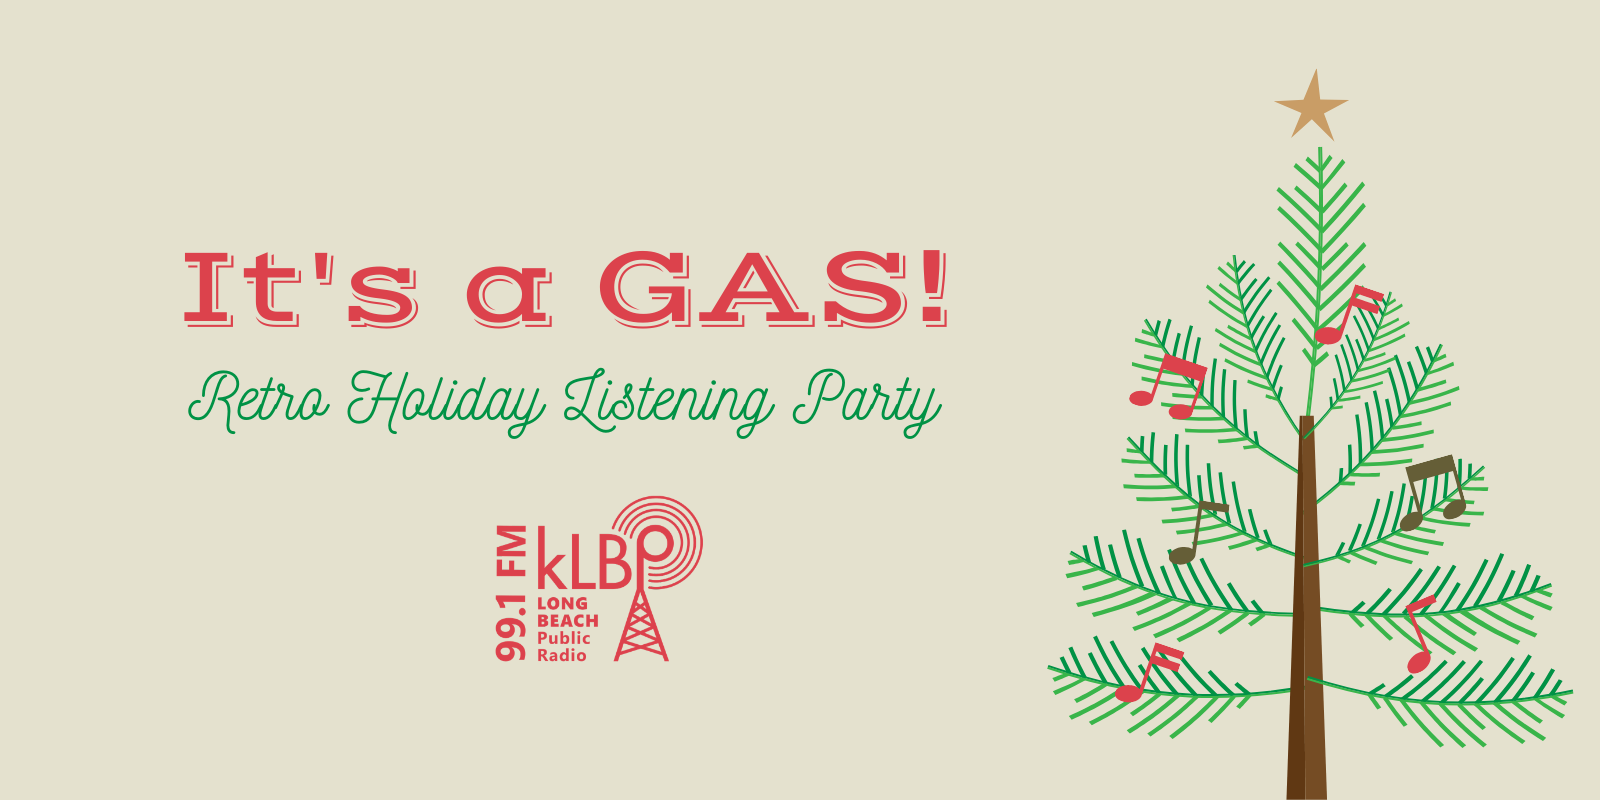 It’s a GAS! Retro Holiday Listening Party